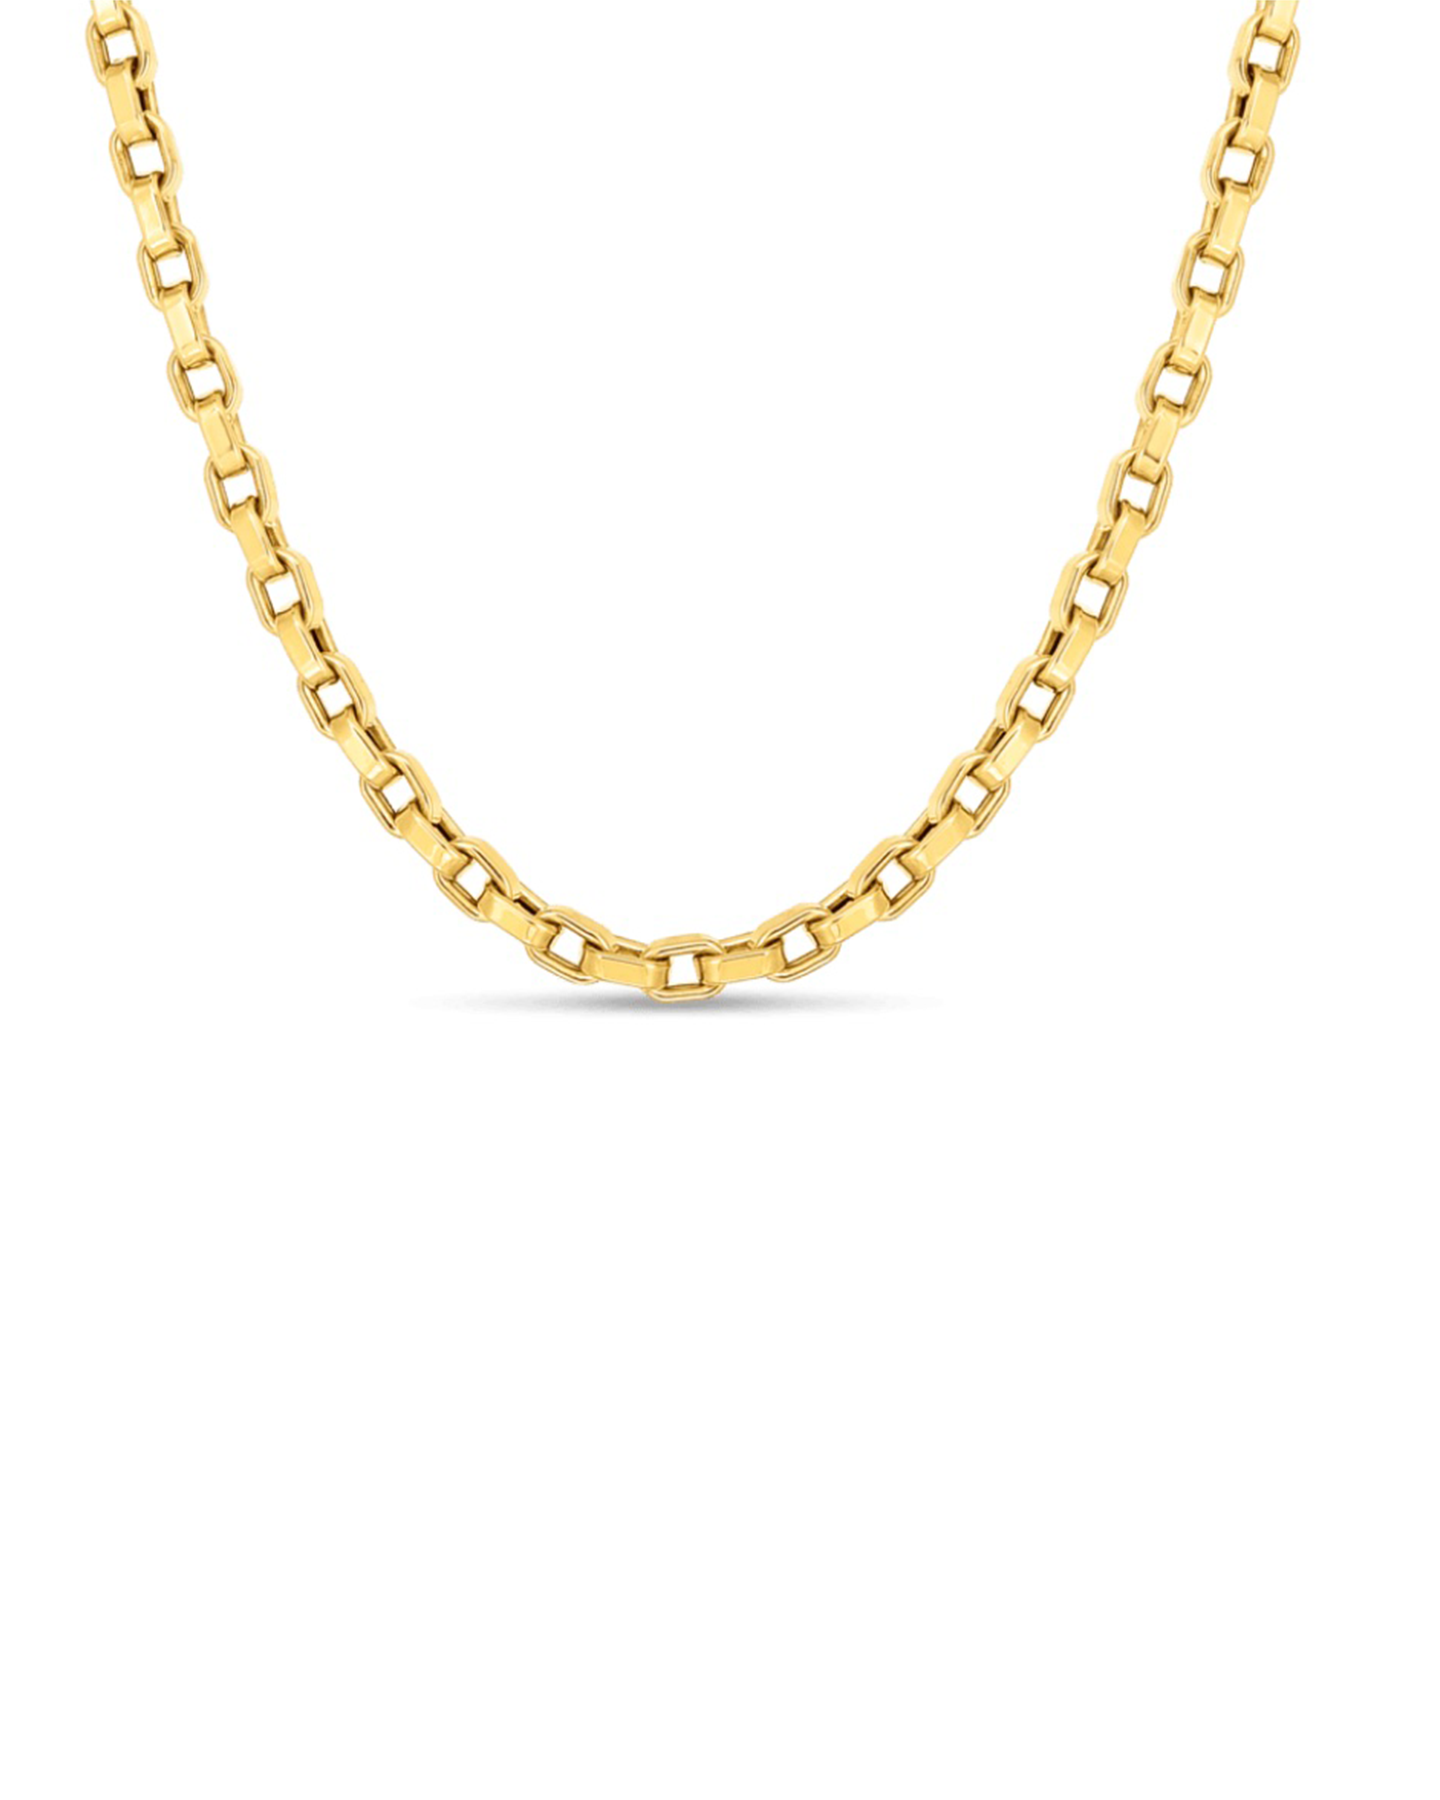 18K YG SQUARE LINK CHAIN 17IN